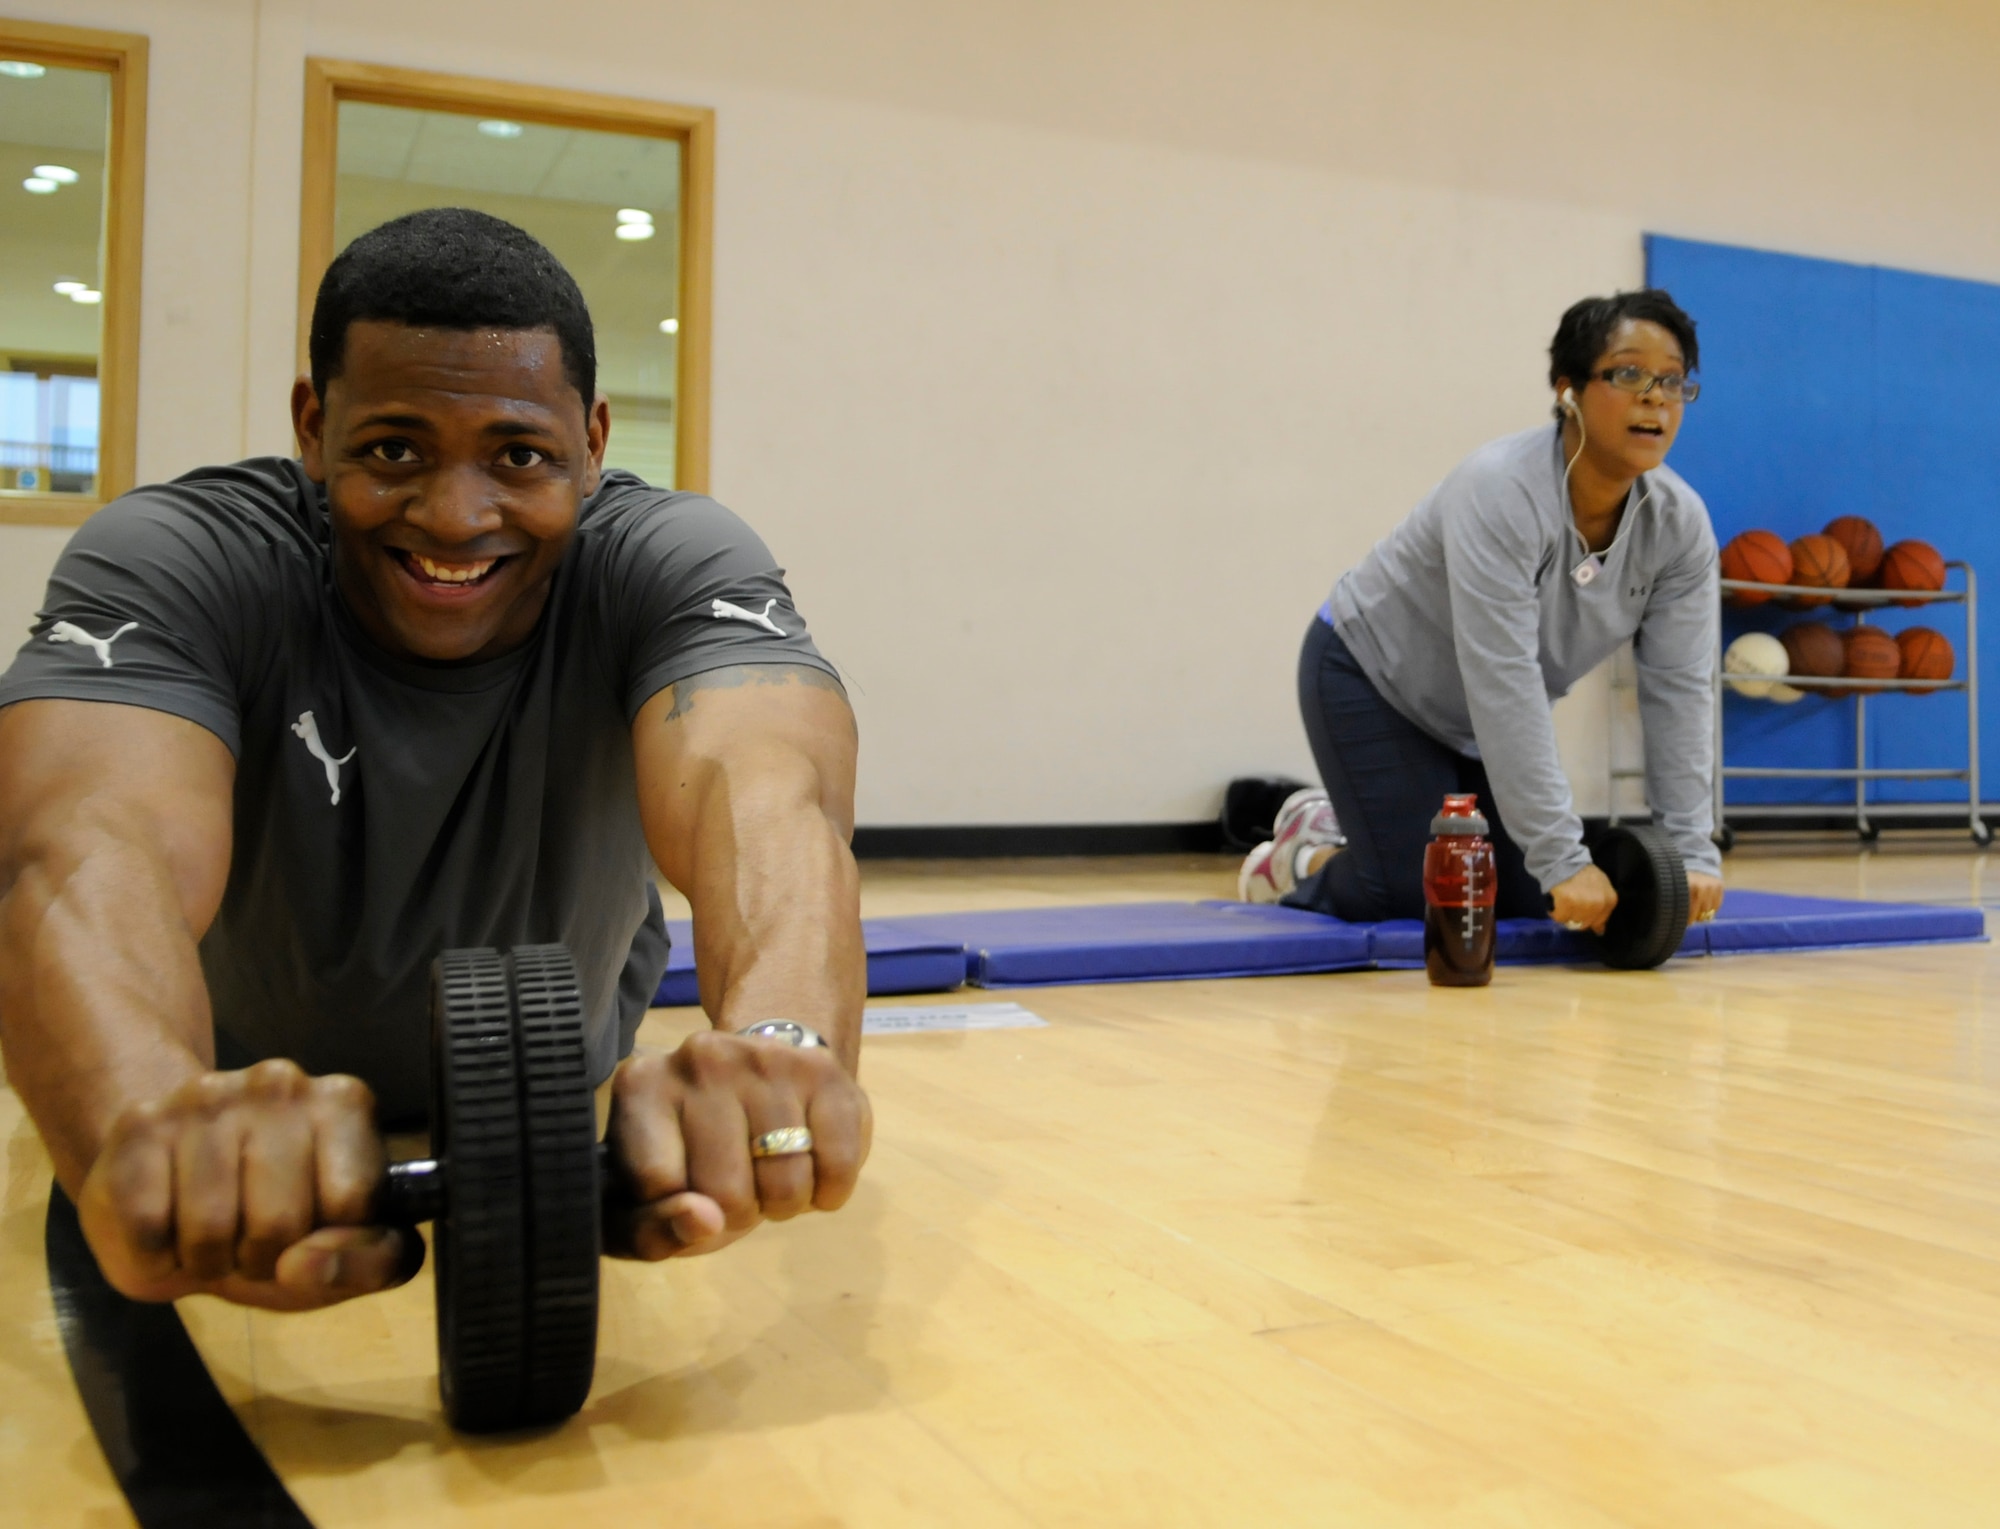 RAF MILDENHALL, England – Master Sgt. Howard Gibson, 351st Air Refueling Squadron, exercises at one of the 32 stations set up at the circuit class at the Hardstand Fitness Center Feb. 24.  The circuit class is highly recommended by the health and wellness center staff for beginners to learn good form and fitness fundamentals.  (U.S. Air Force photo/Staff Sgt. Christopher L. Ingersoll)